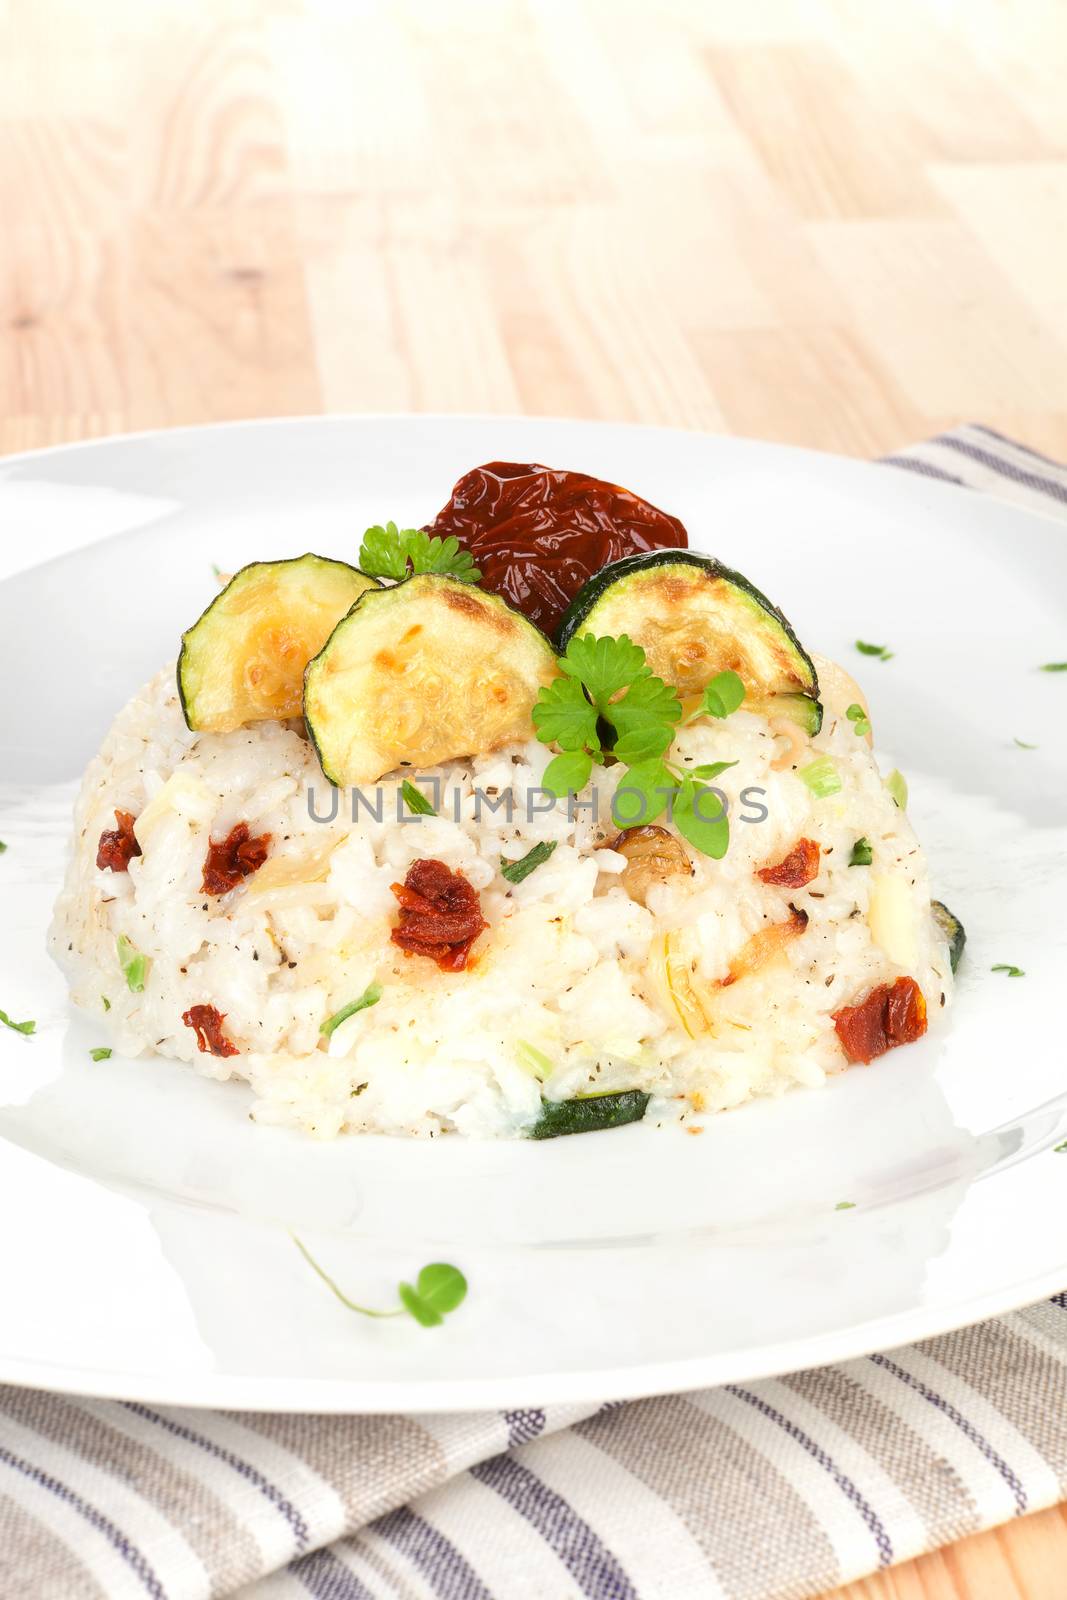 Delicious risotto. by eskymaks